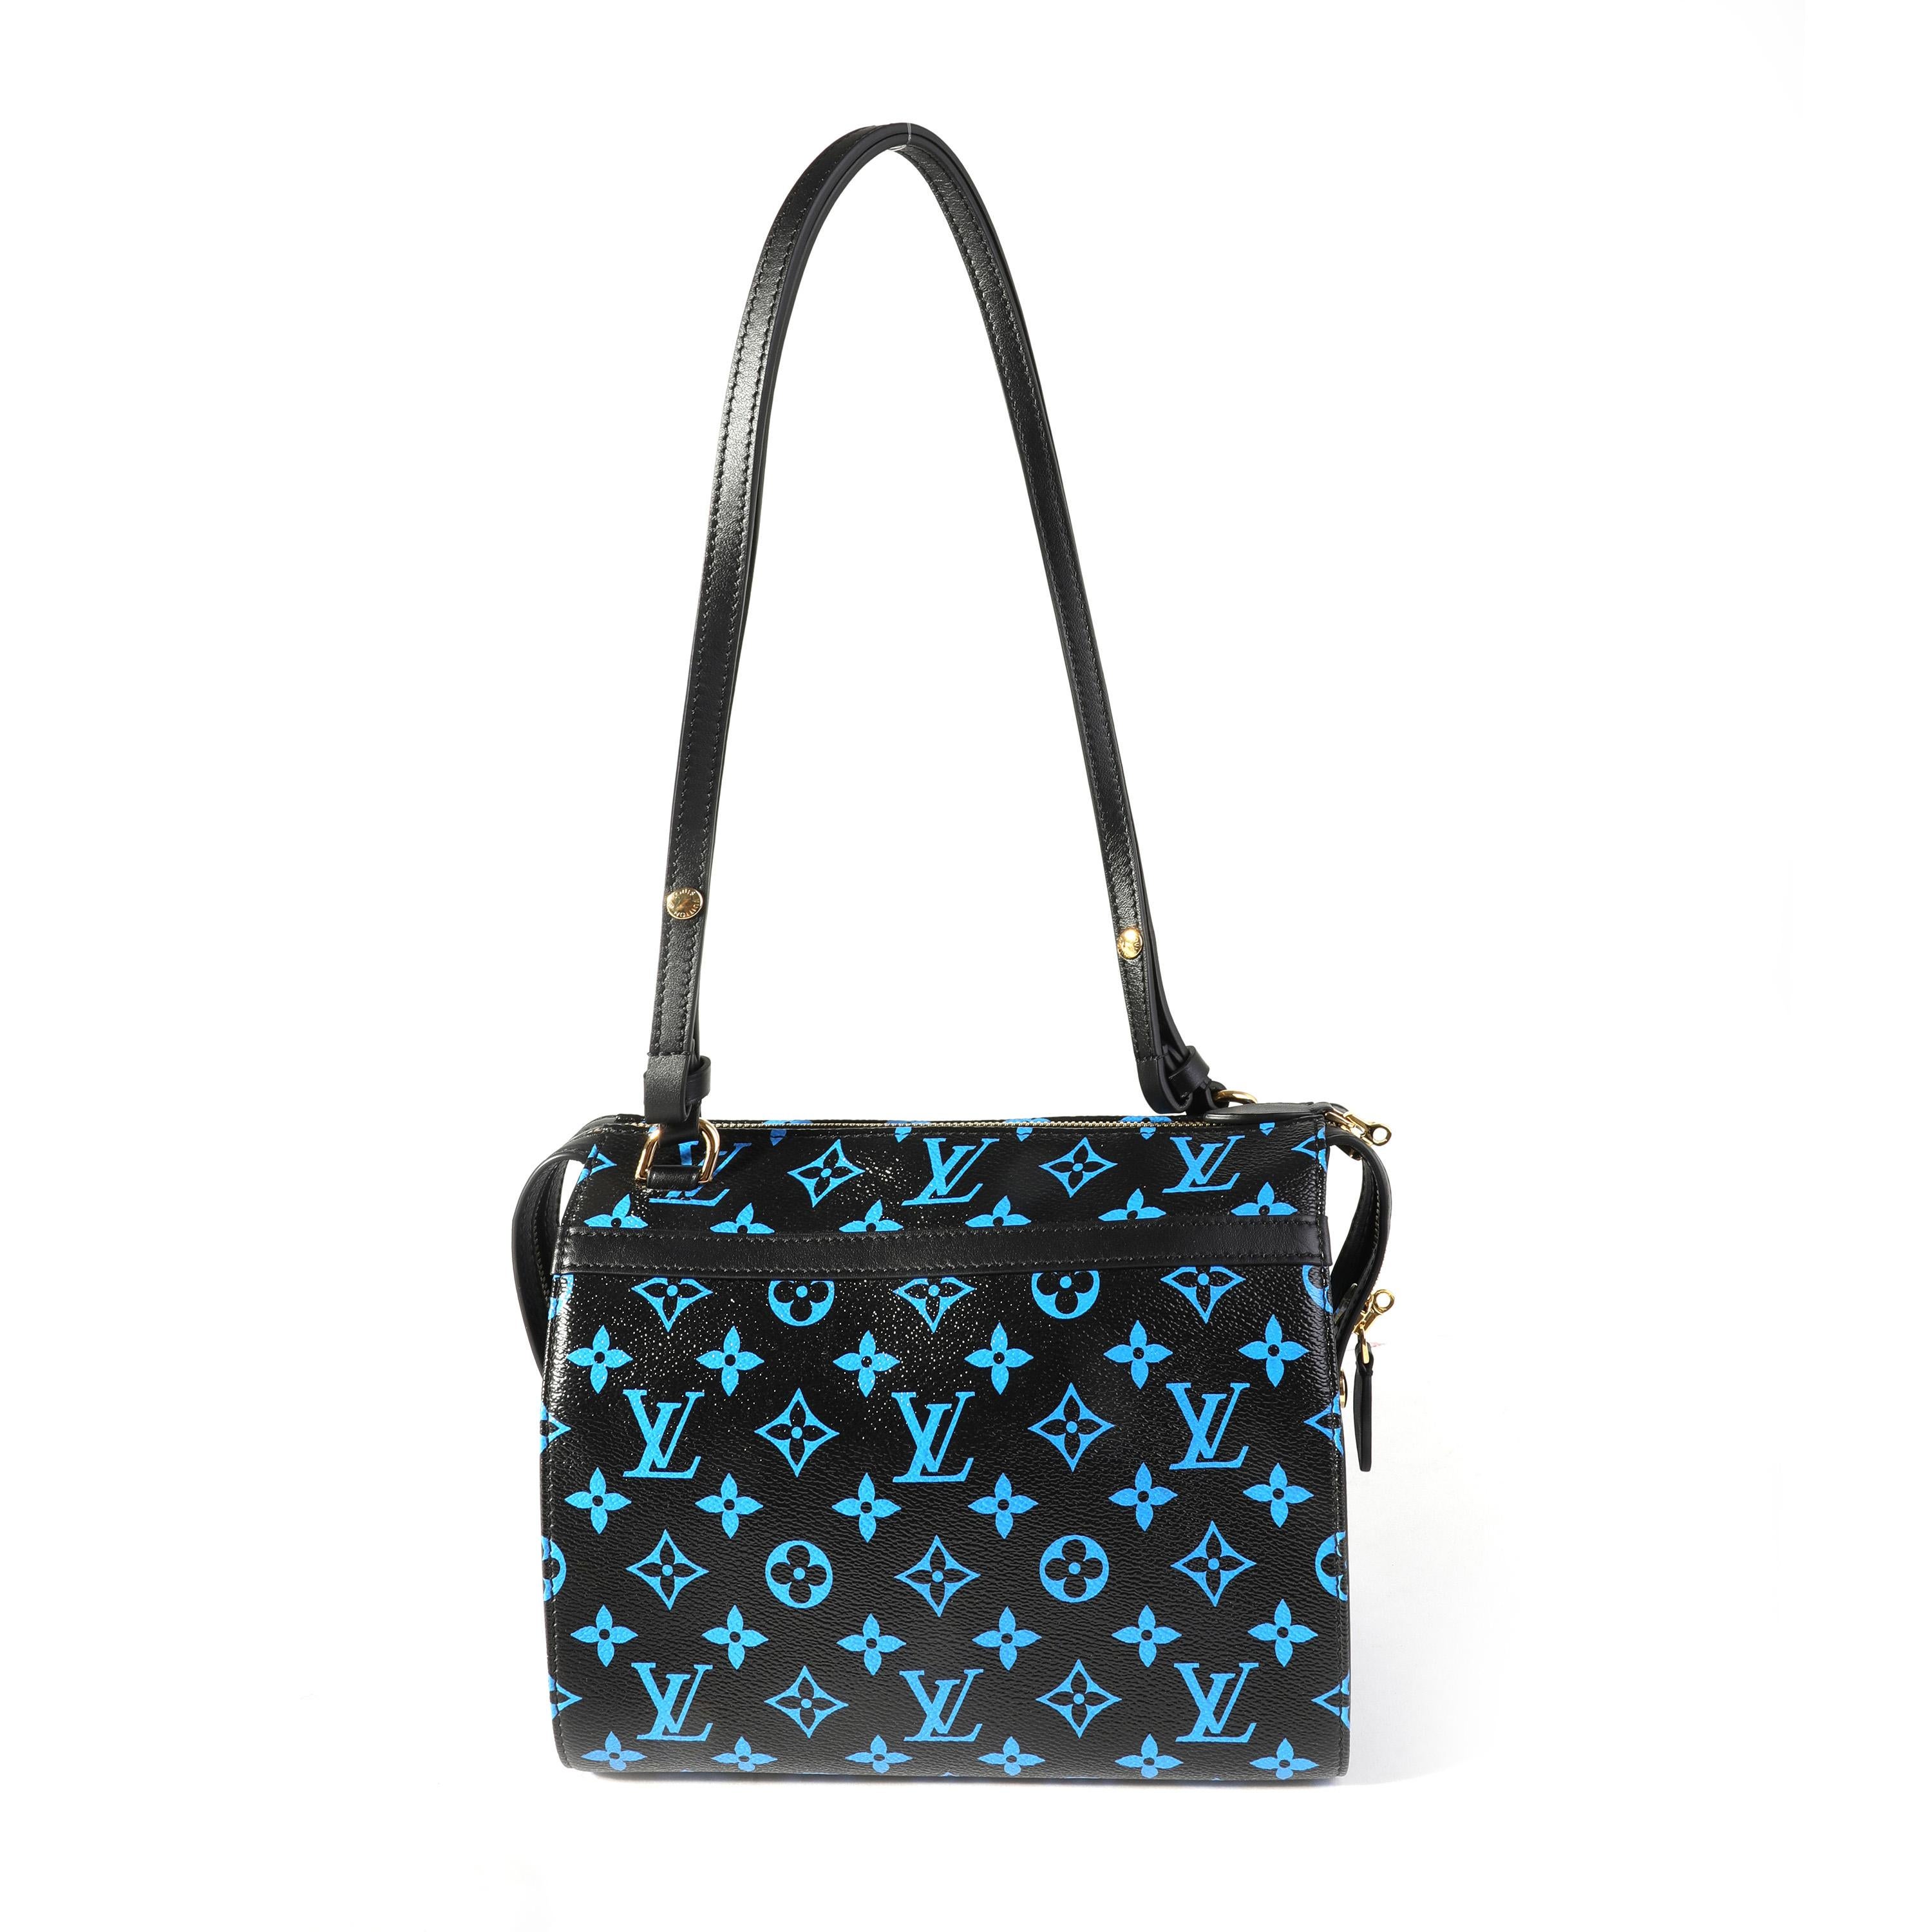 Listing Title: Louis Vuitton Black & Blue Monogram Canvas and Navy Leather Amazon Speedy PM
SKU: 117928
Condition: Pre-owned (3000)
Handbag Condition: Excellent
Condition Comments: Excellent Condition. Scuffing to the interior. No other visible